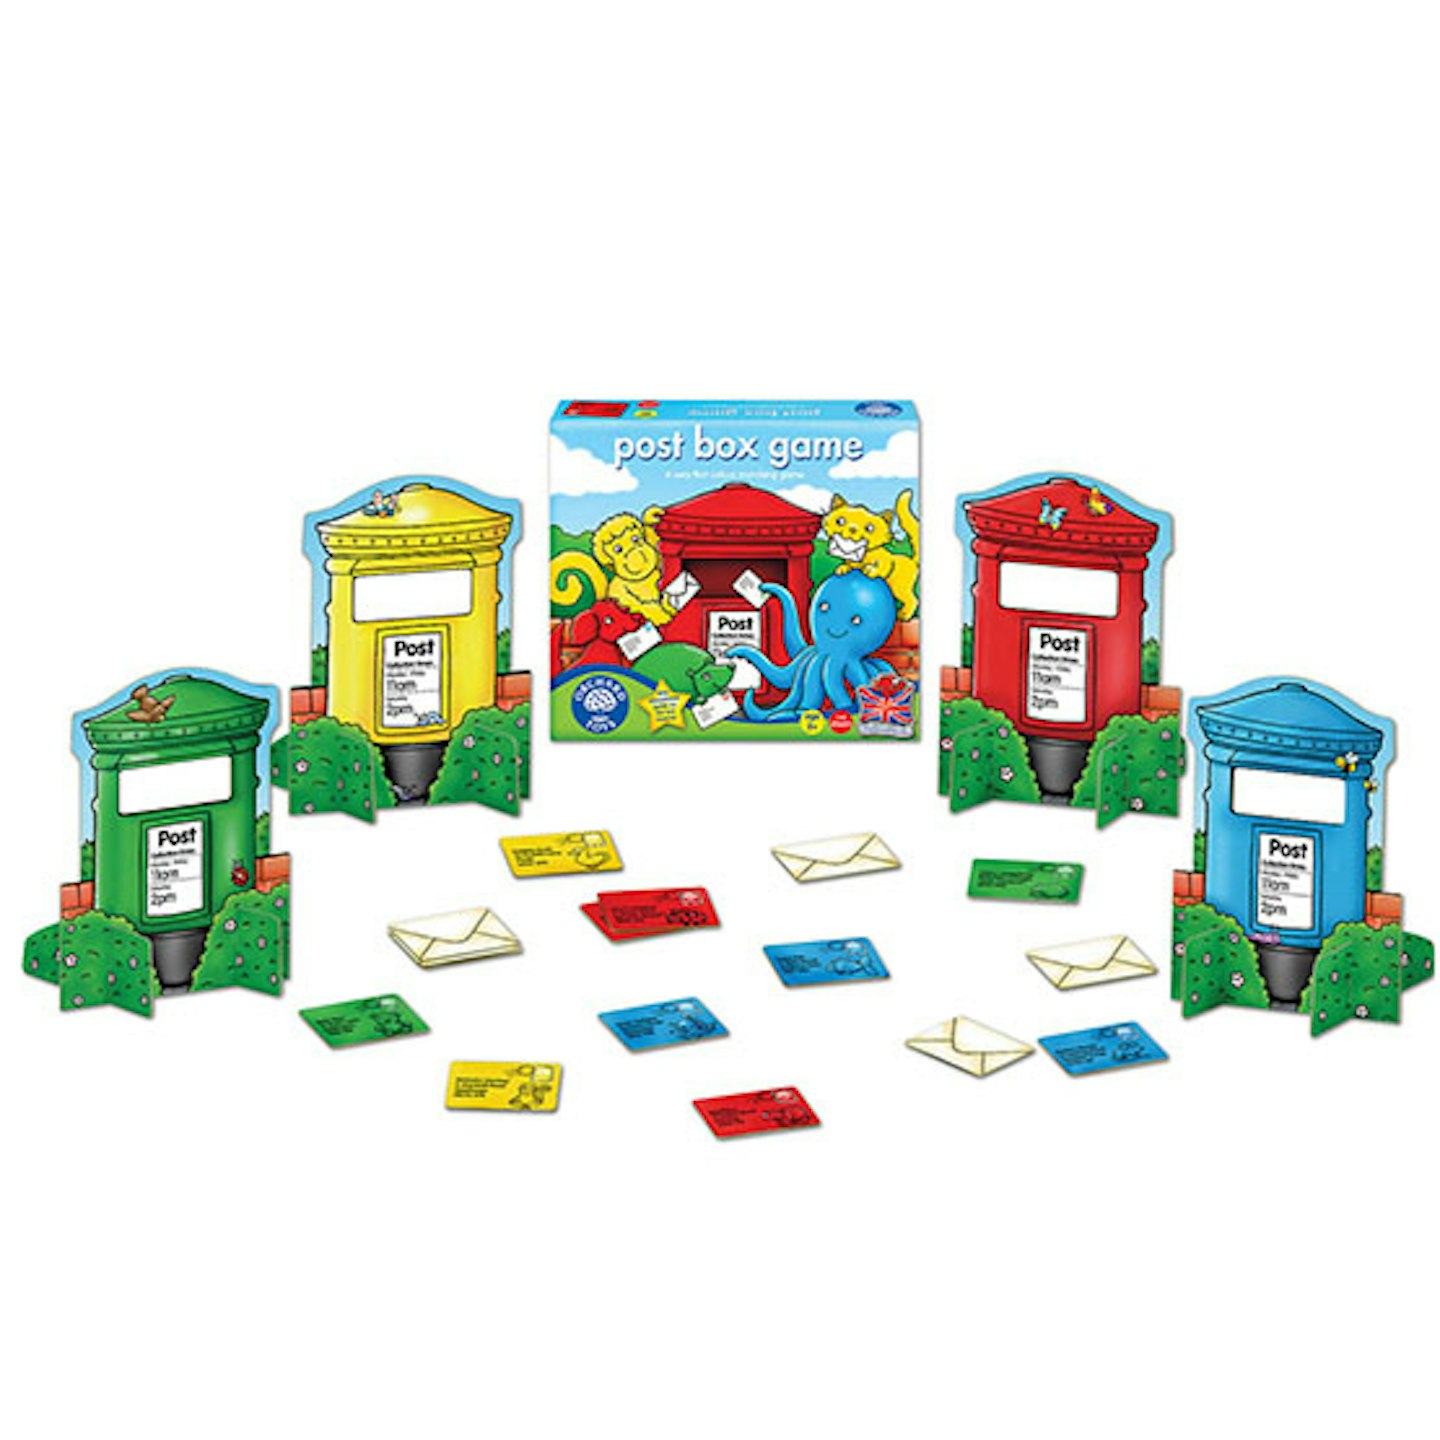 Best for puzzle development: Orchard Toys Post Box Game